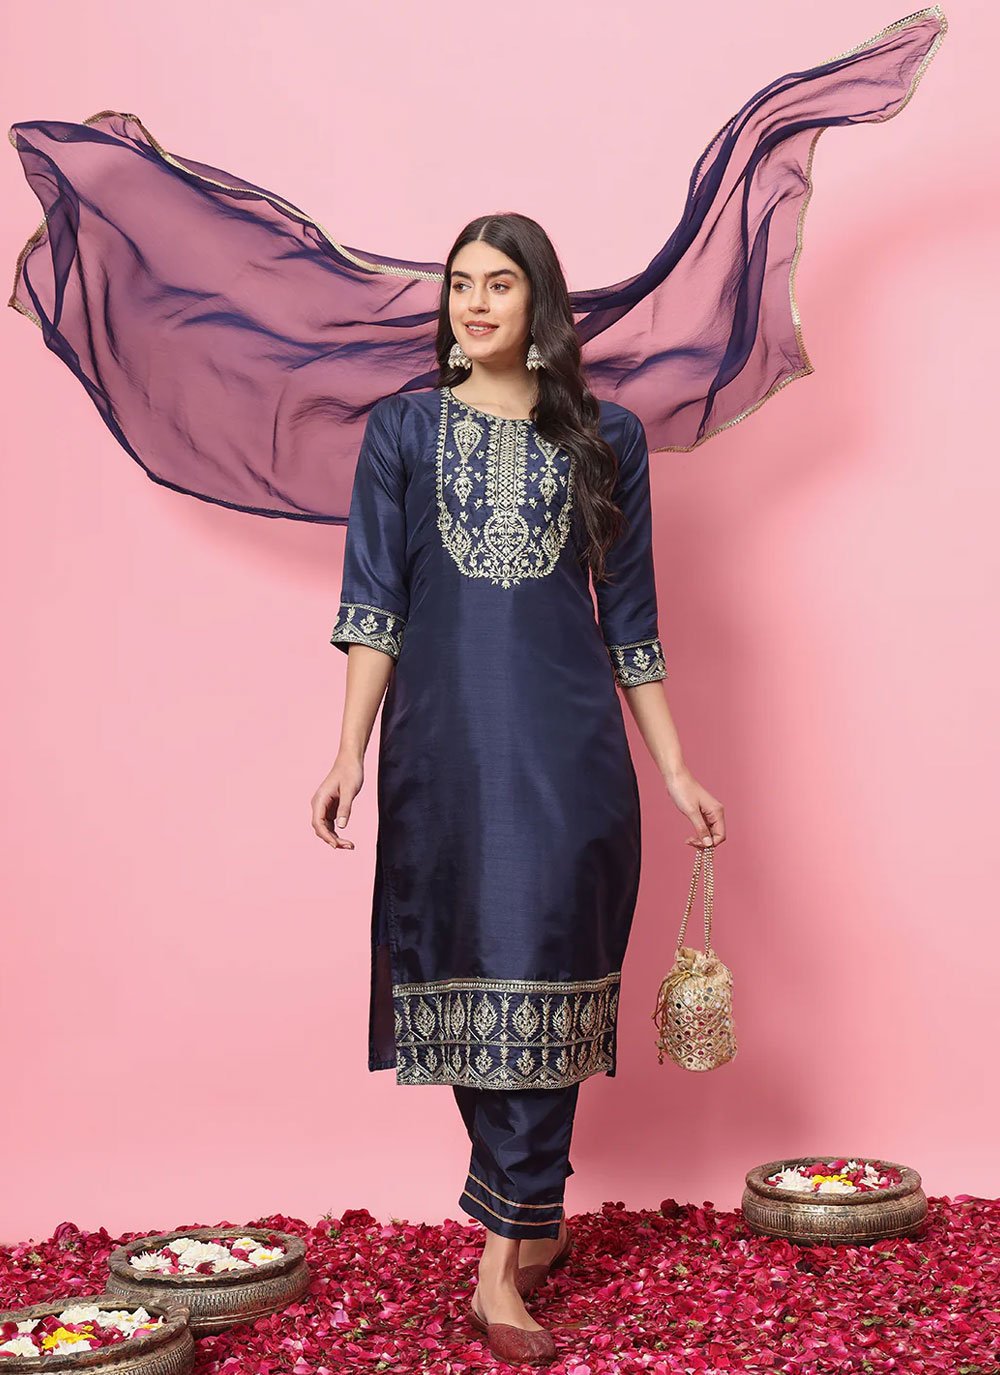 What are the different types of salwar kameez? - Quora